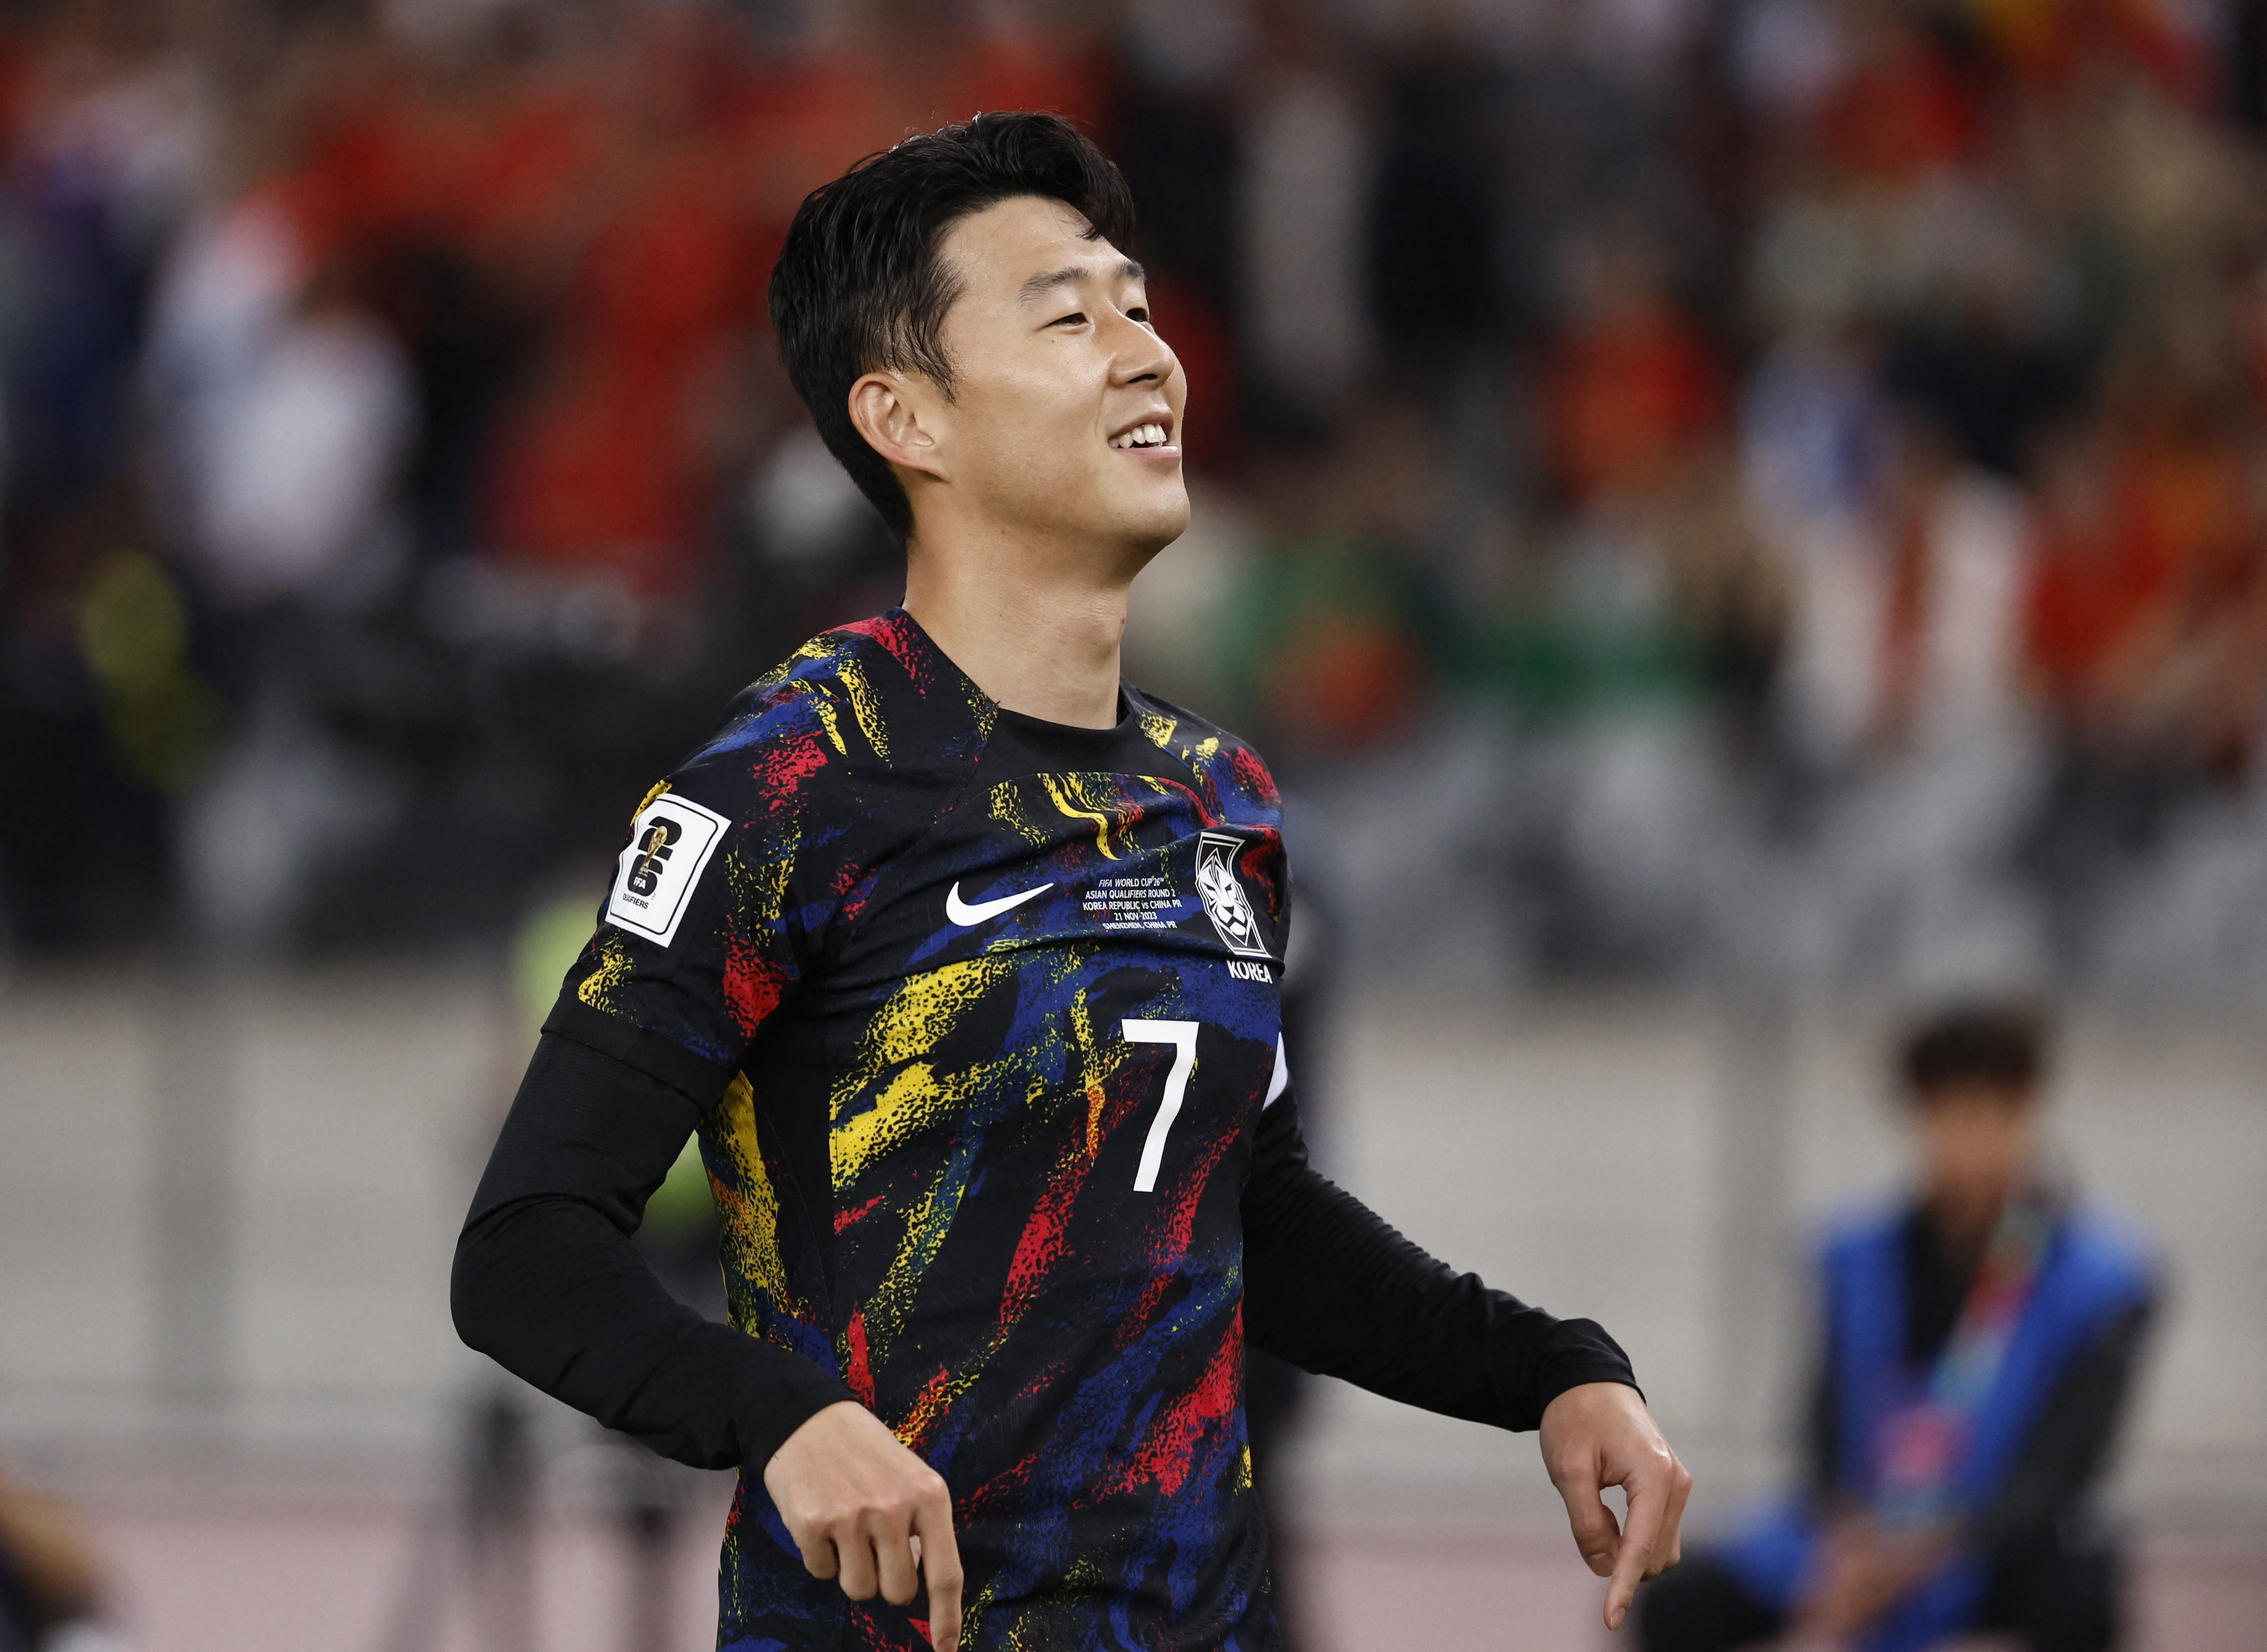 Son bags double for South Korea as top sides win in Asian qualifiers